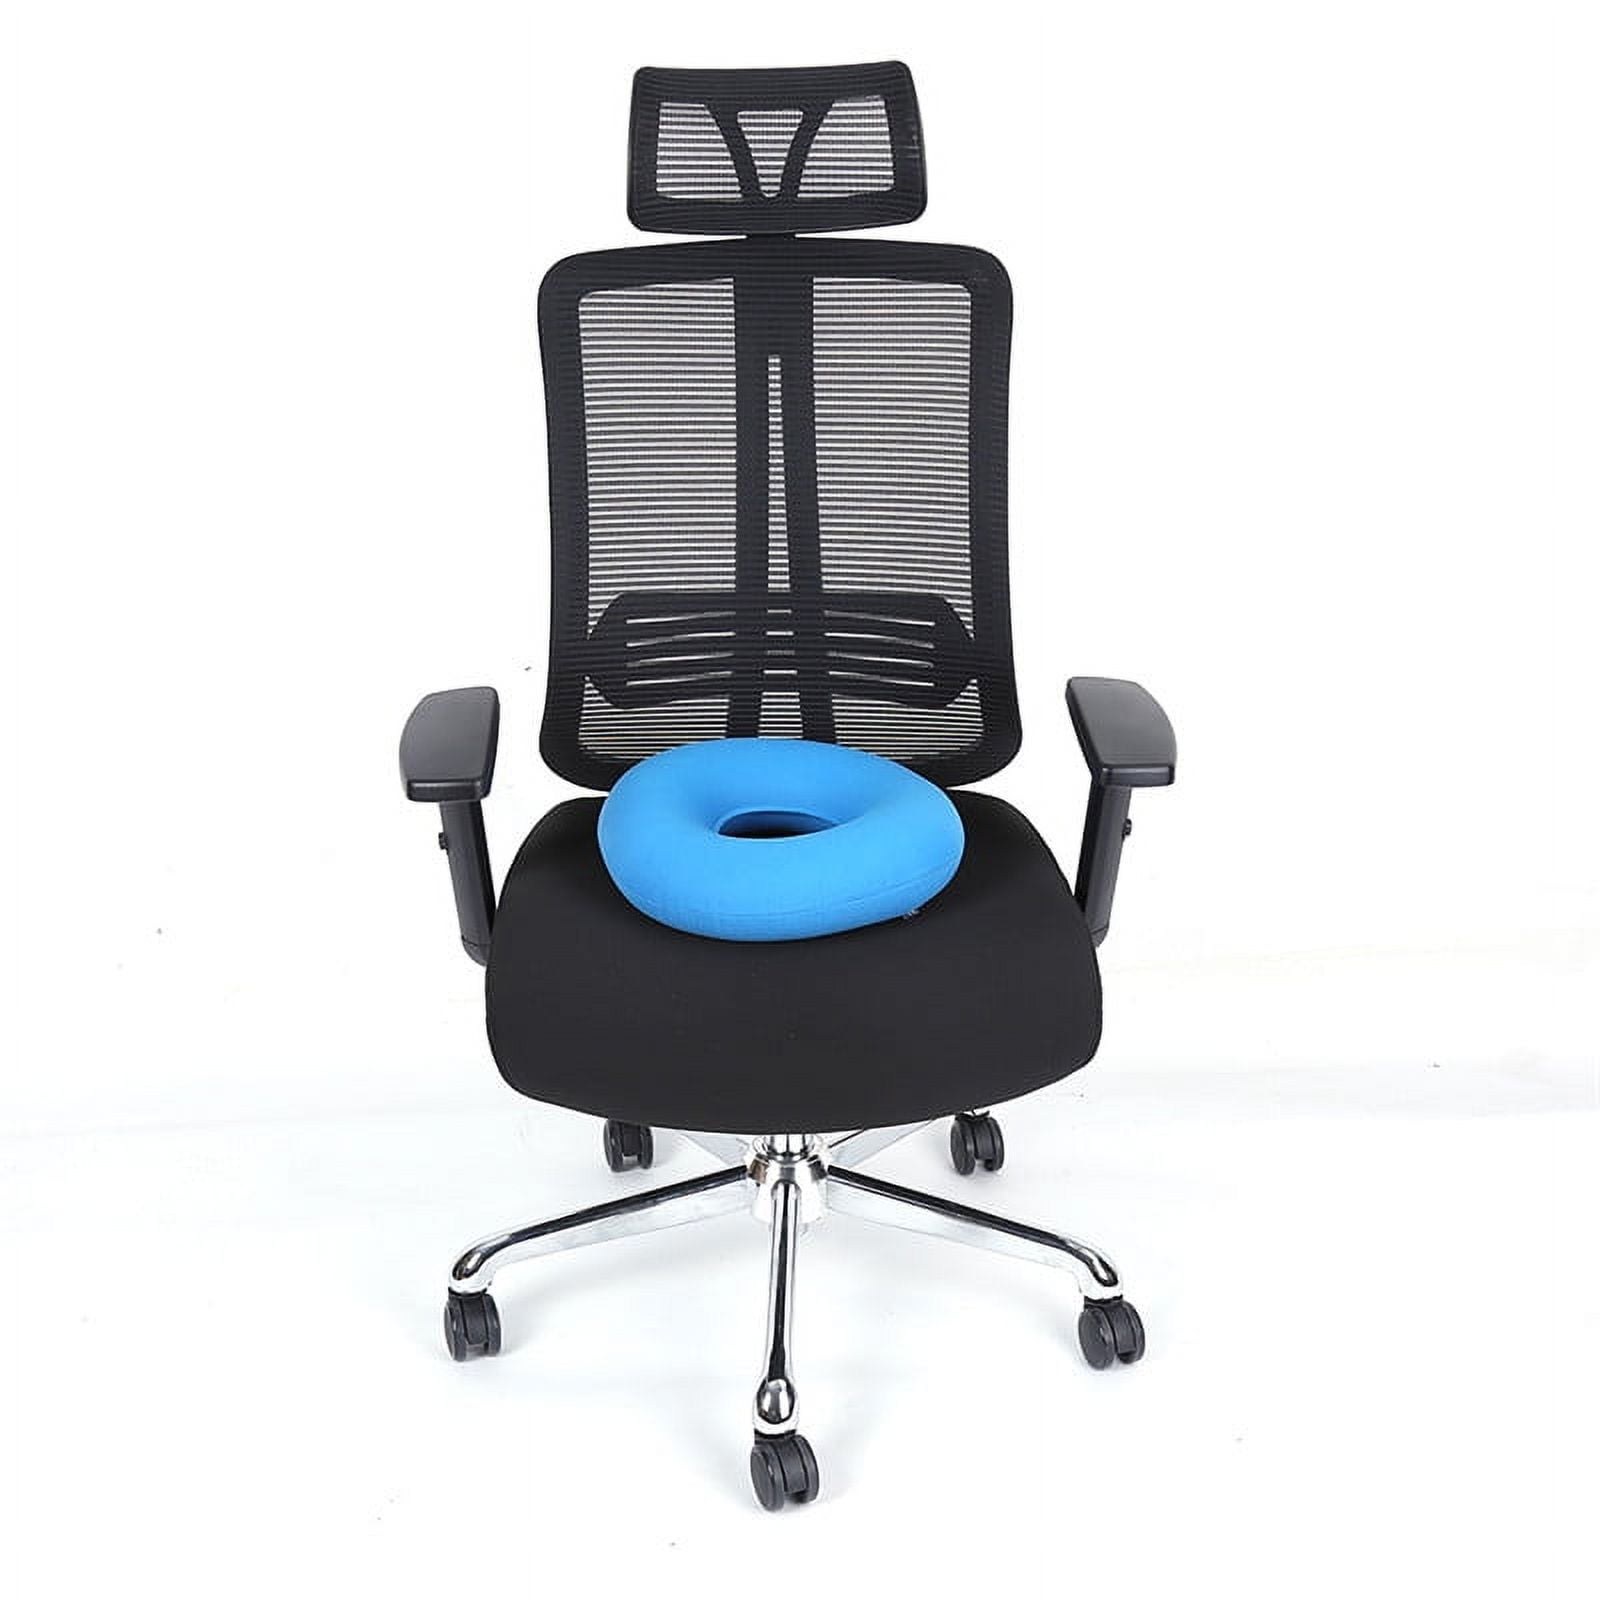 Inflatable Donut Seat Cushion for Hemorrhoid Seat Pad Adjustable  Lightweight Inflatable Massage Pillow Chair Seat Cushion New